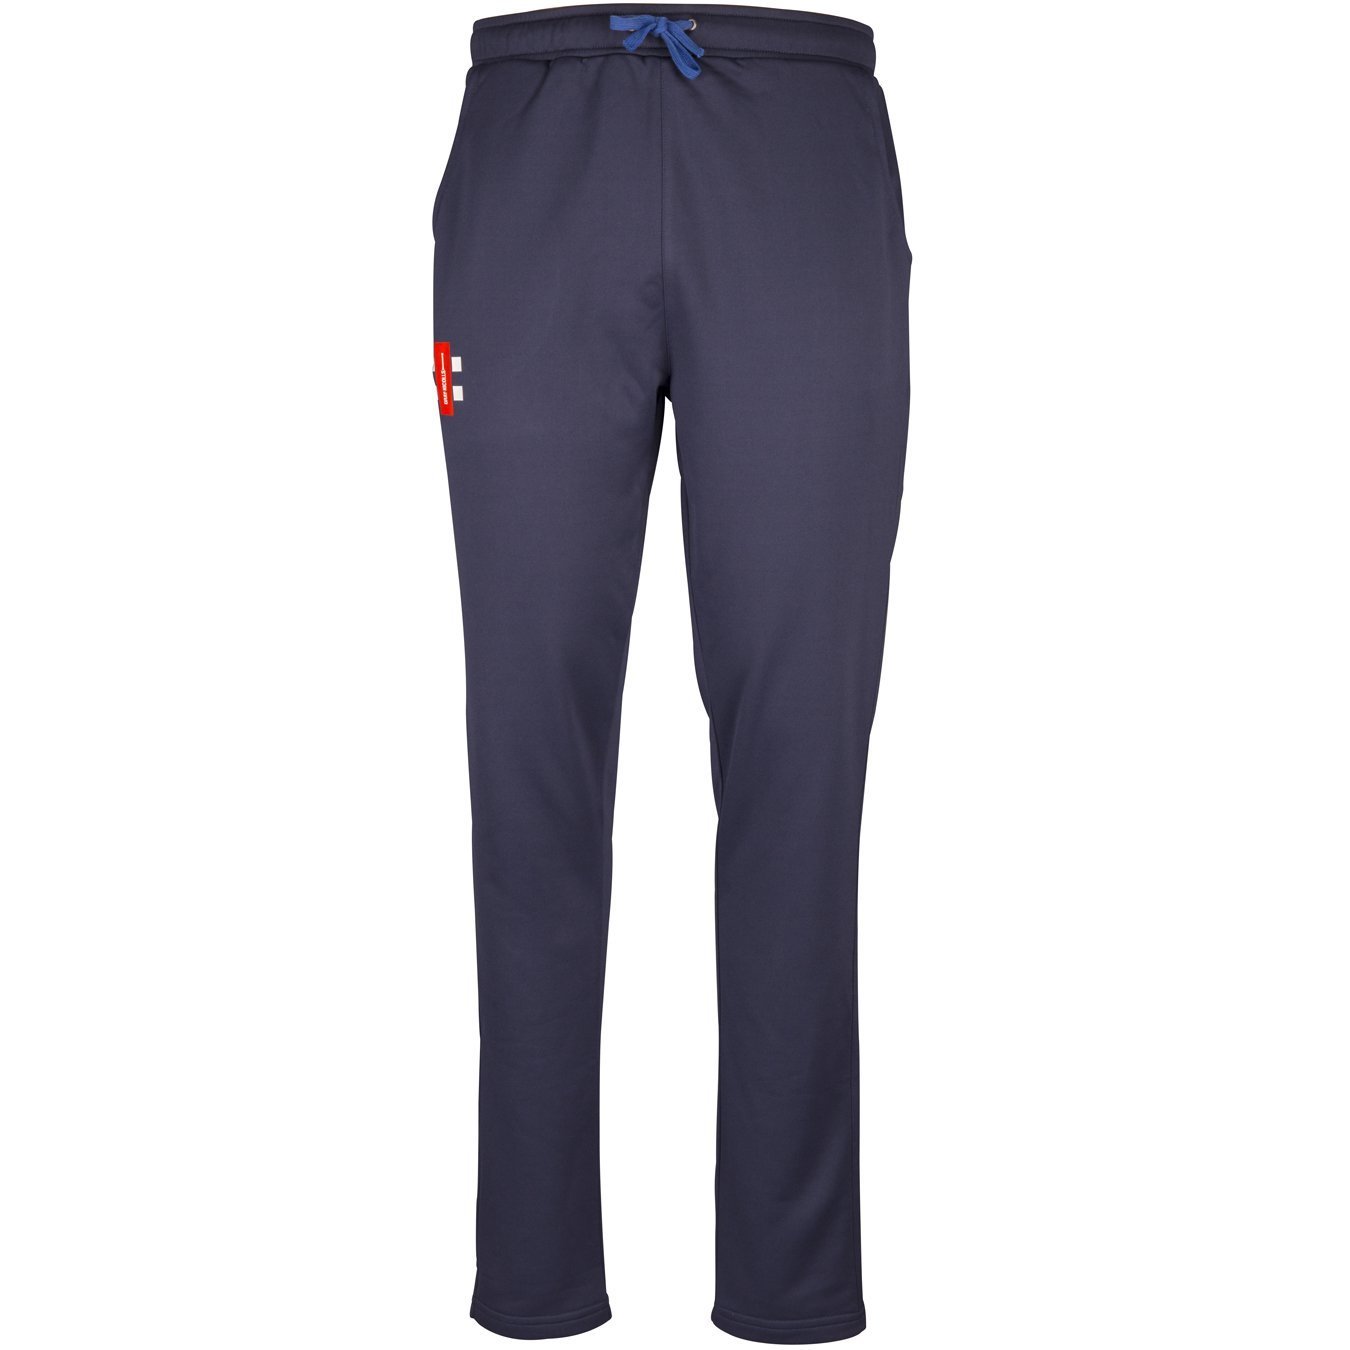 Maltby Pro Performance Training Pant Adult